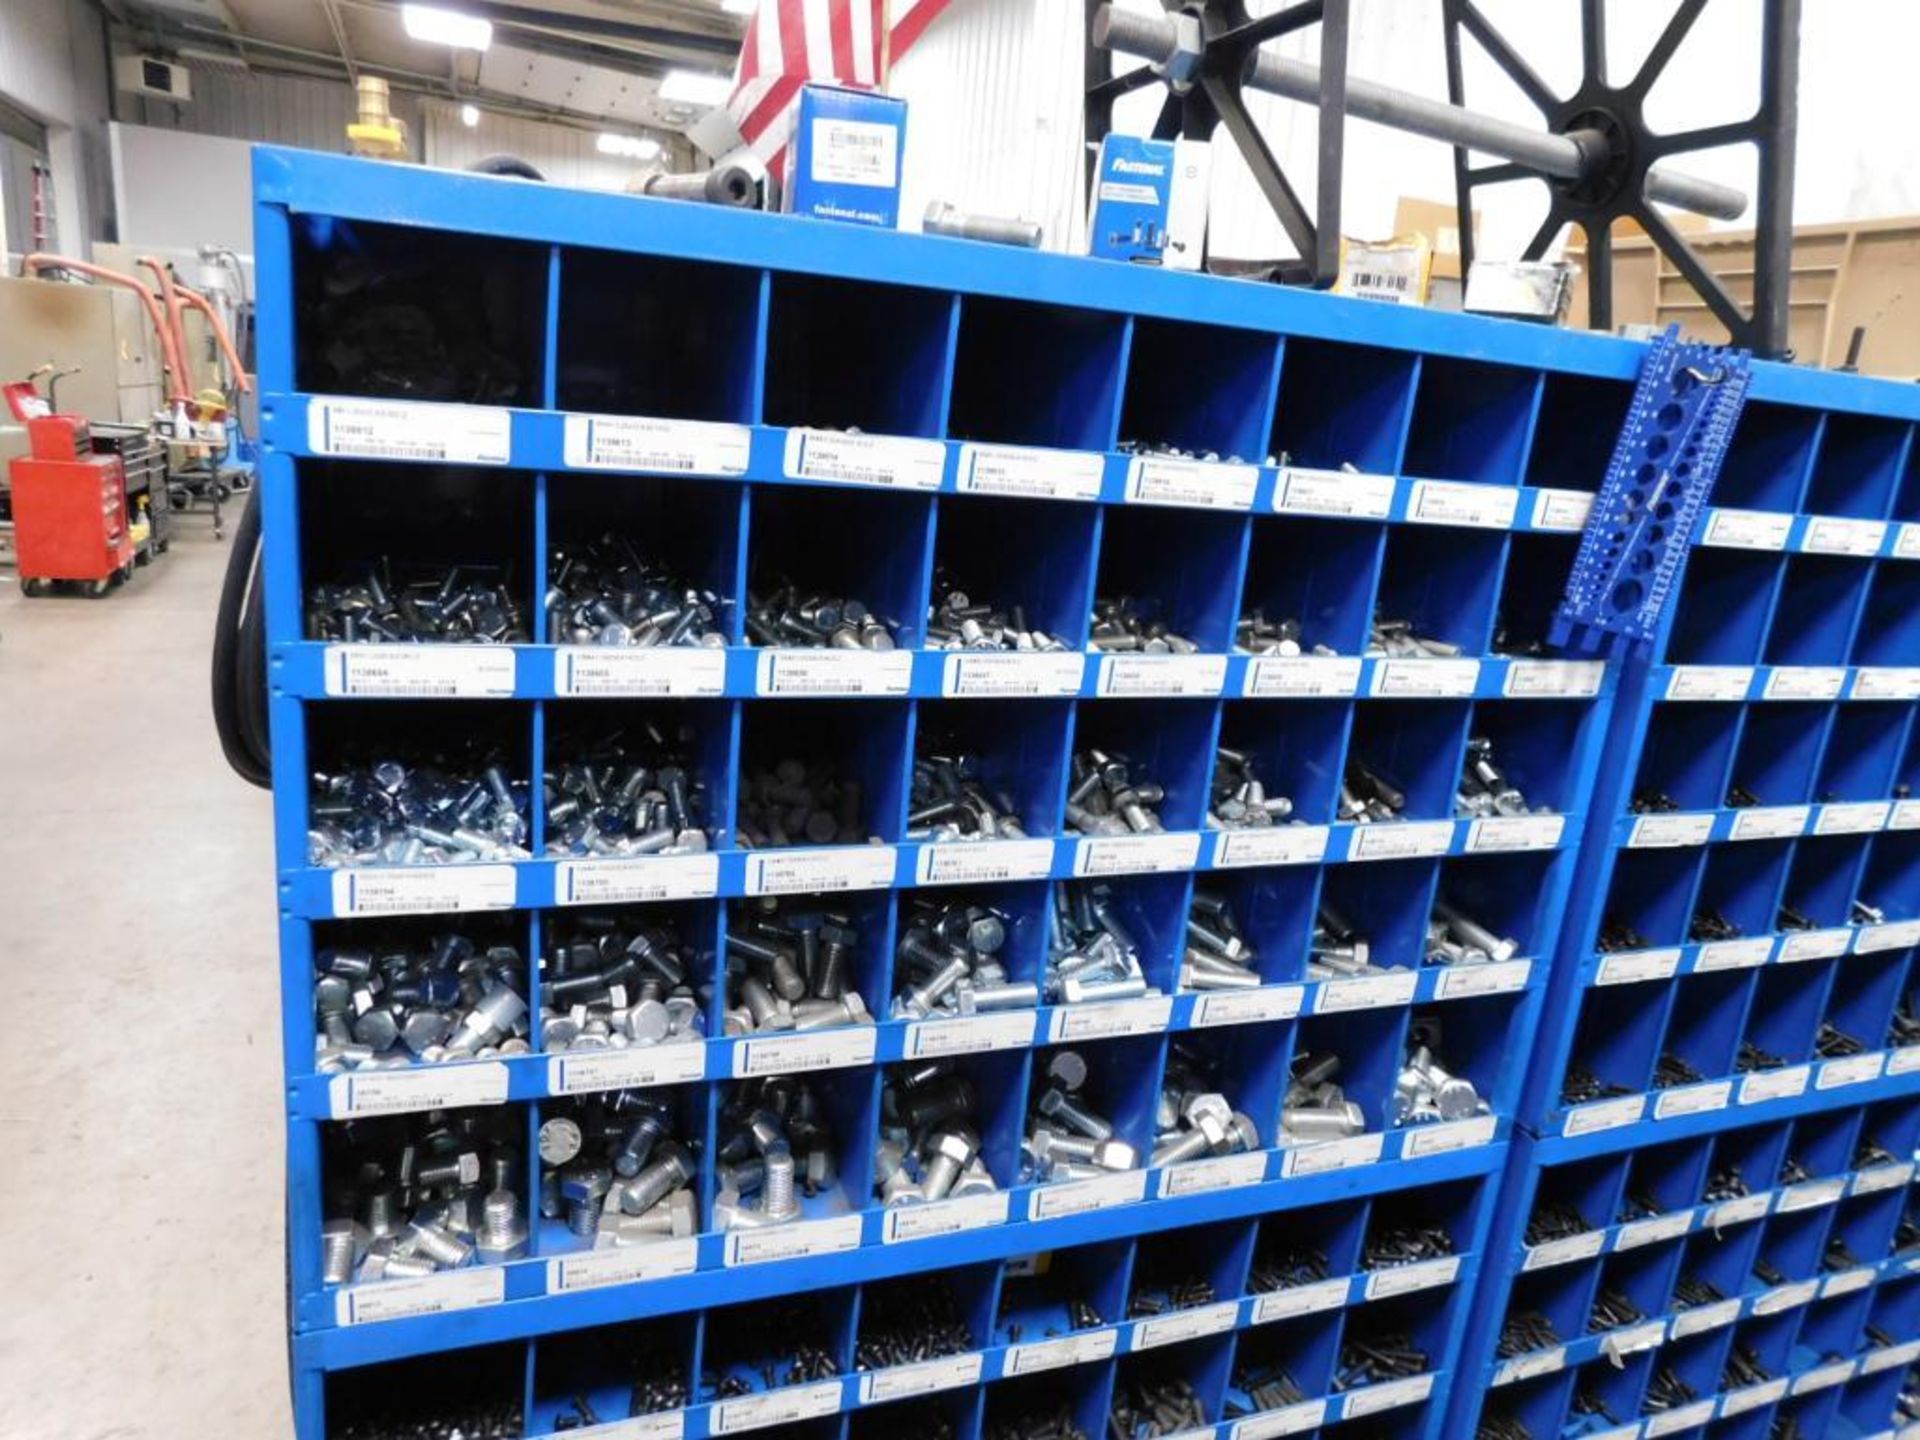 LOT: (5) Sections Fastenal Compartment Organizers w/Contents of Assorted Hardware, Bolts, Nuts, Wash - Image 2 of 11